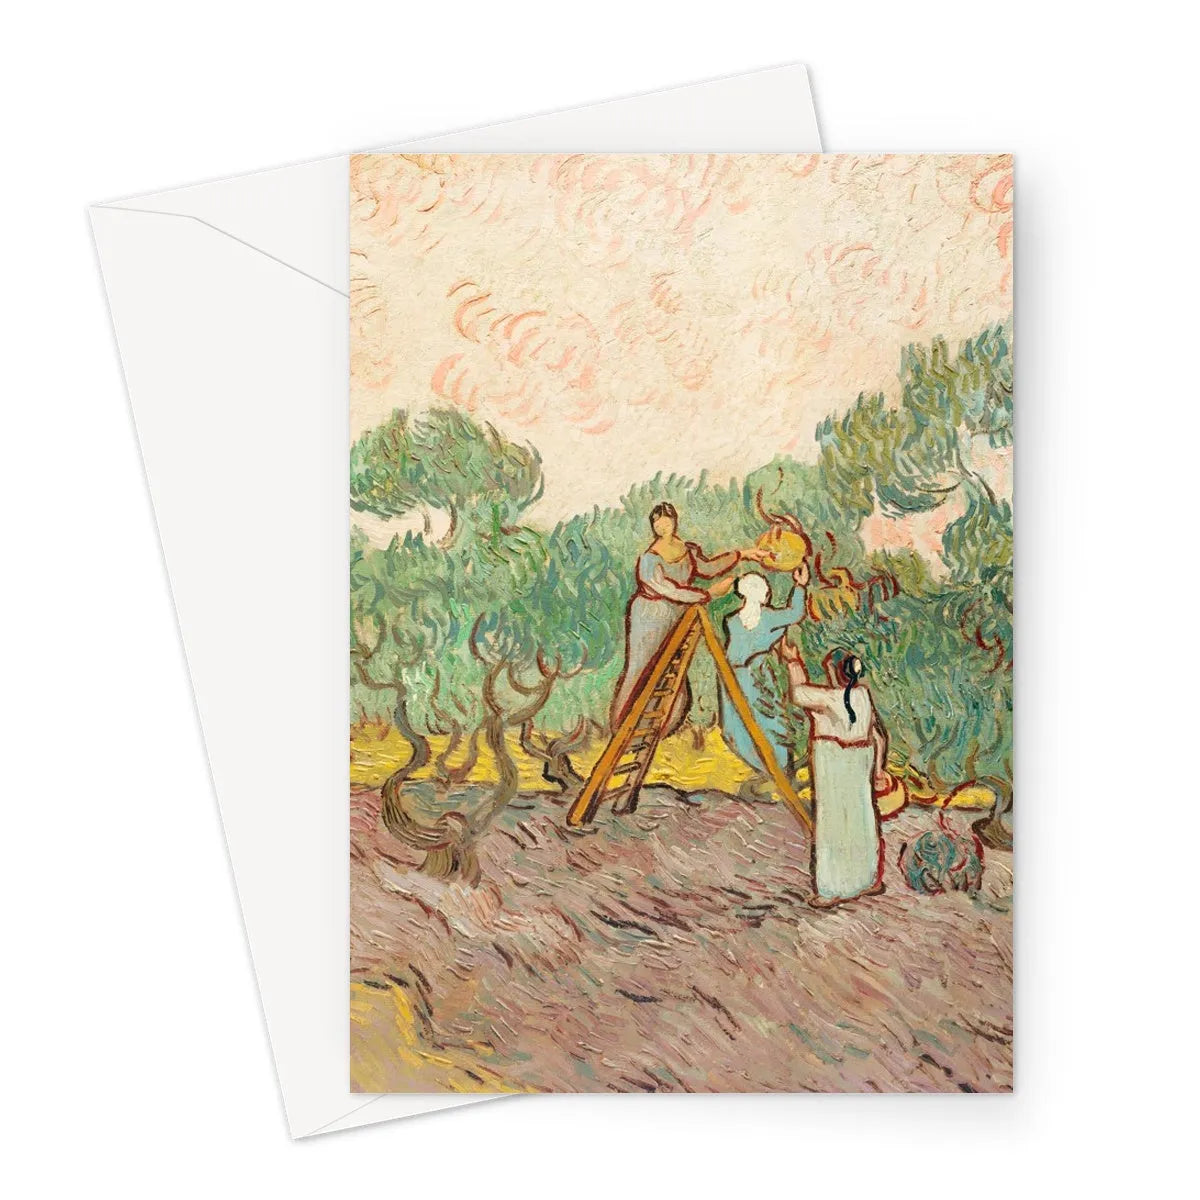 Women Picking Olives By Vincent Van Gogh Greeting Card - A5 Portrait / 1 Card - Notebooks & Notepads - Aesthetic Art